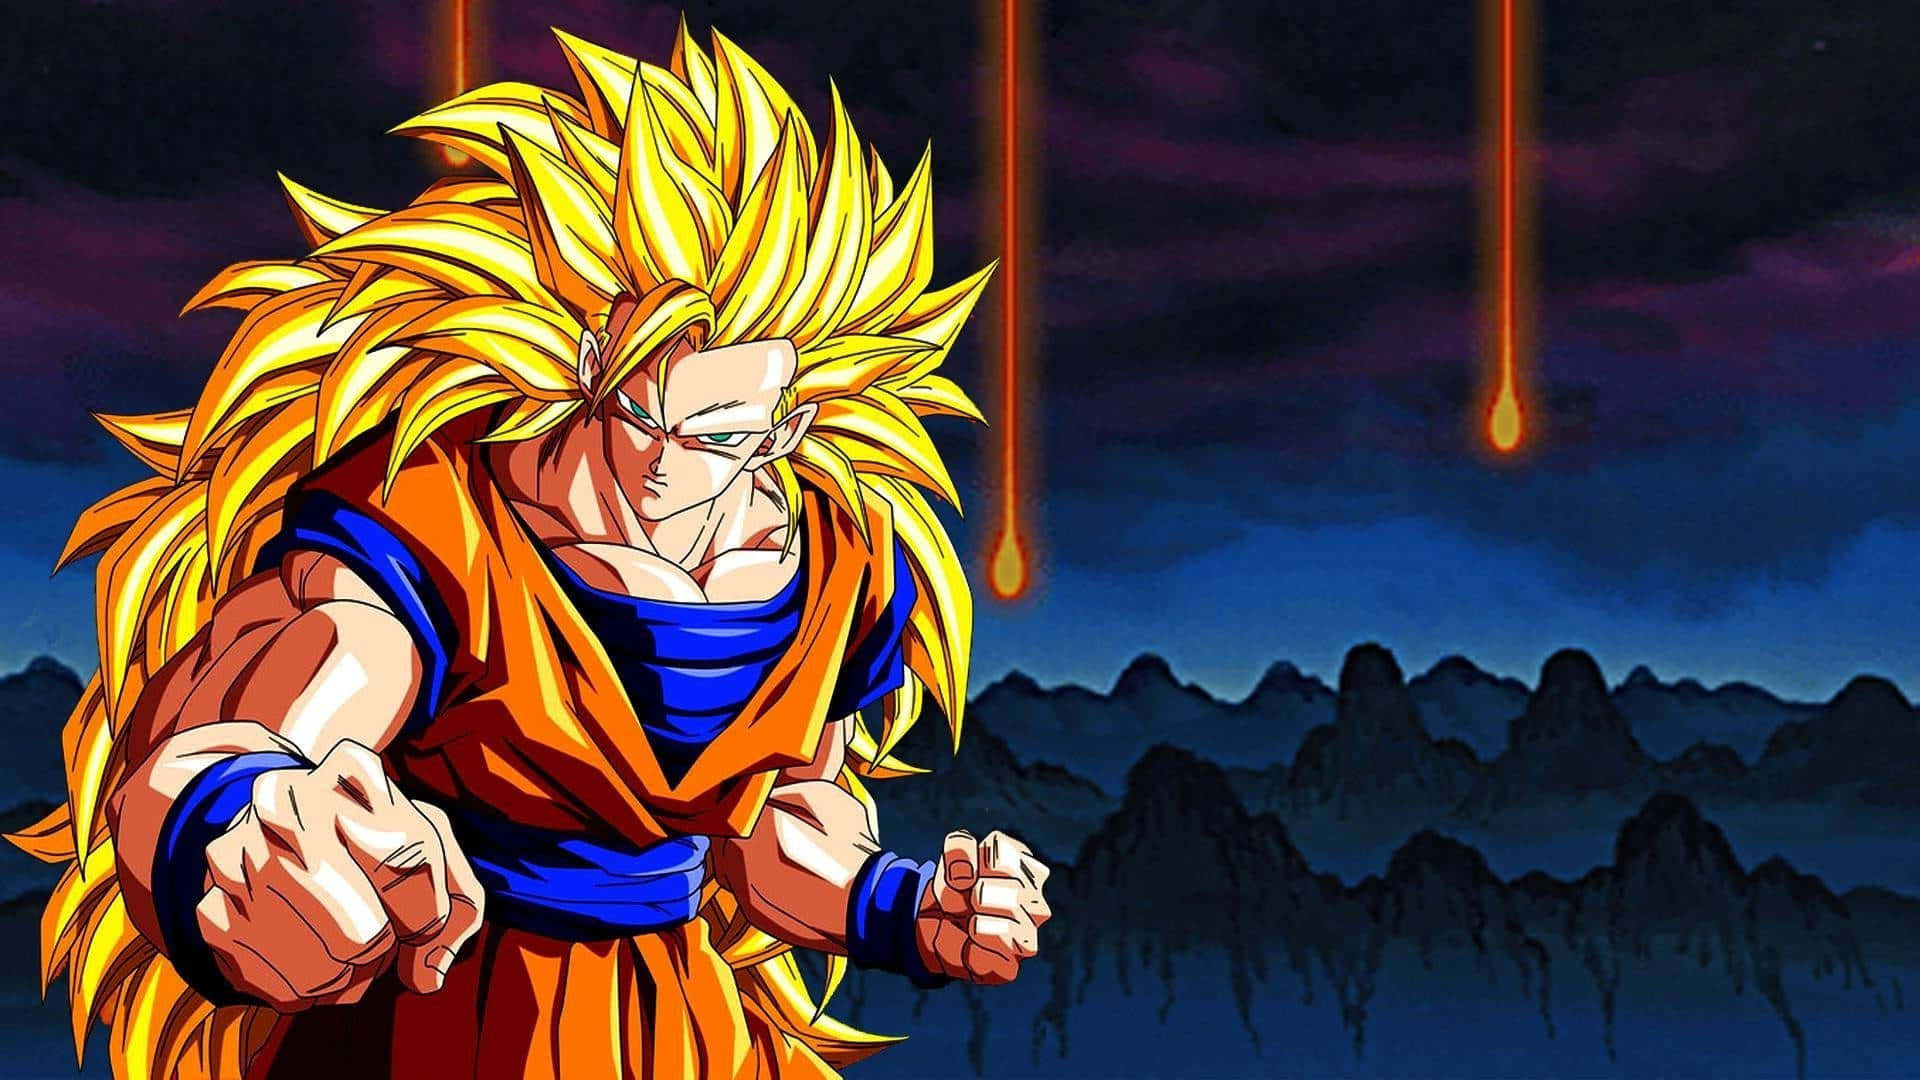 Epic Lineup of Iconic Dragon Ball Z Characters Wallpaper